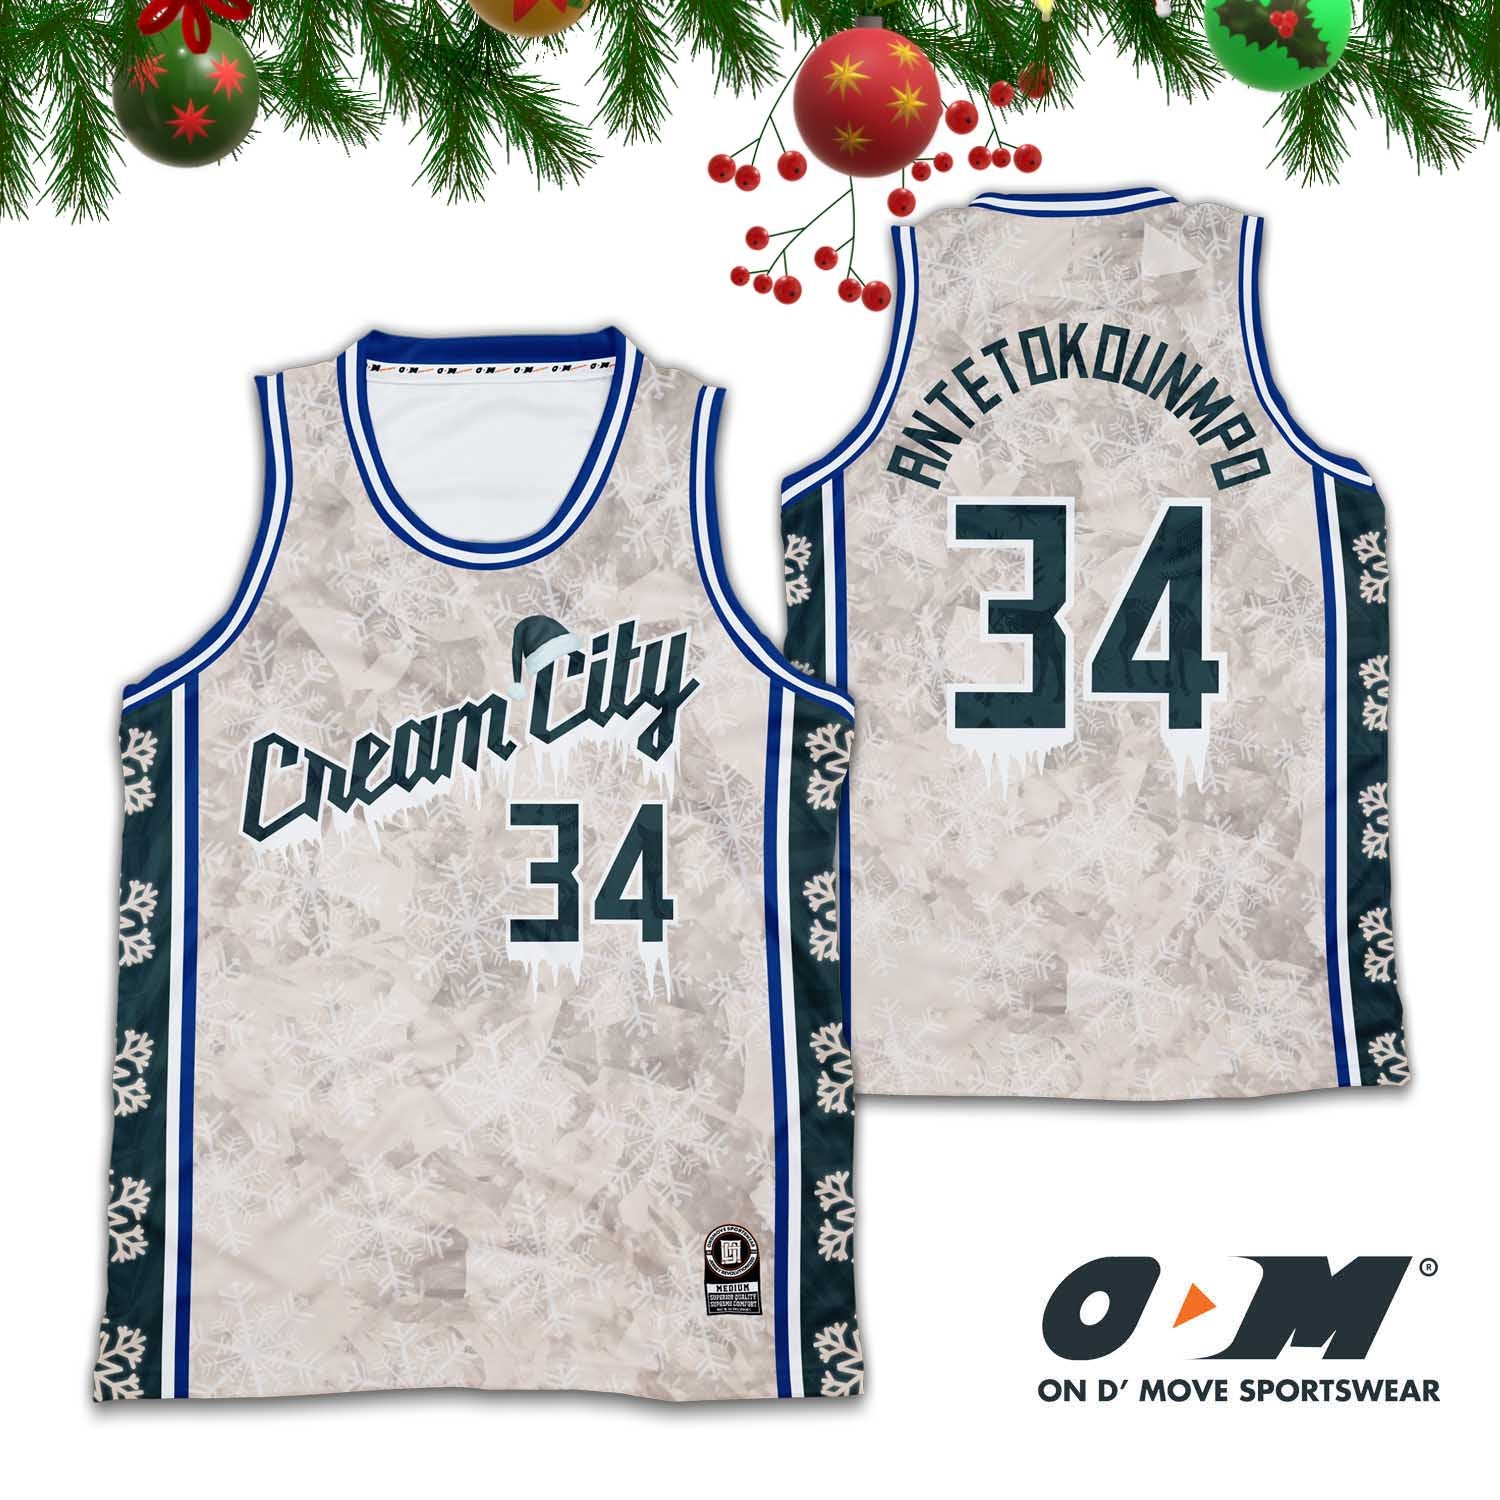 christmas jersey concept